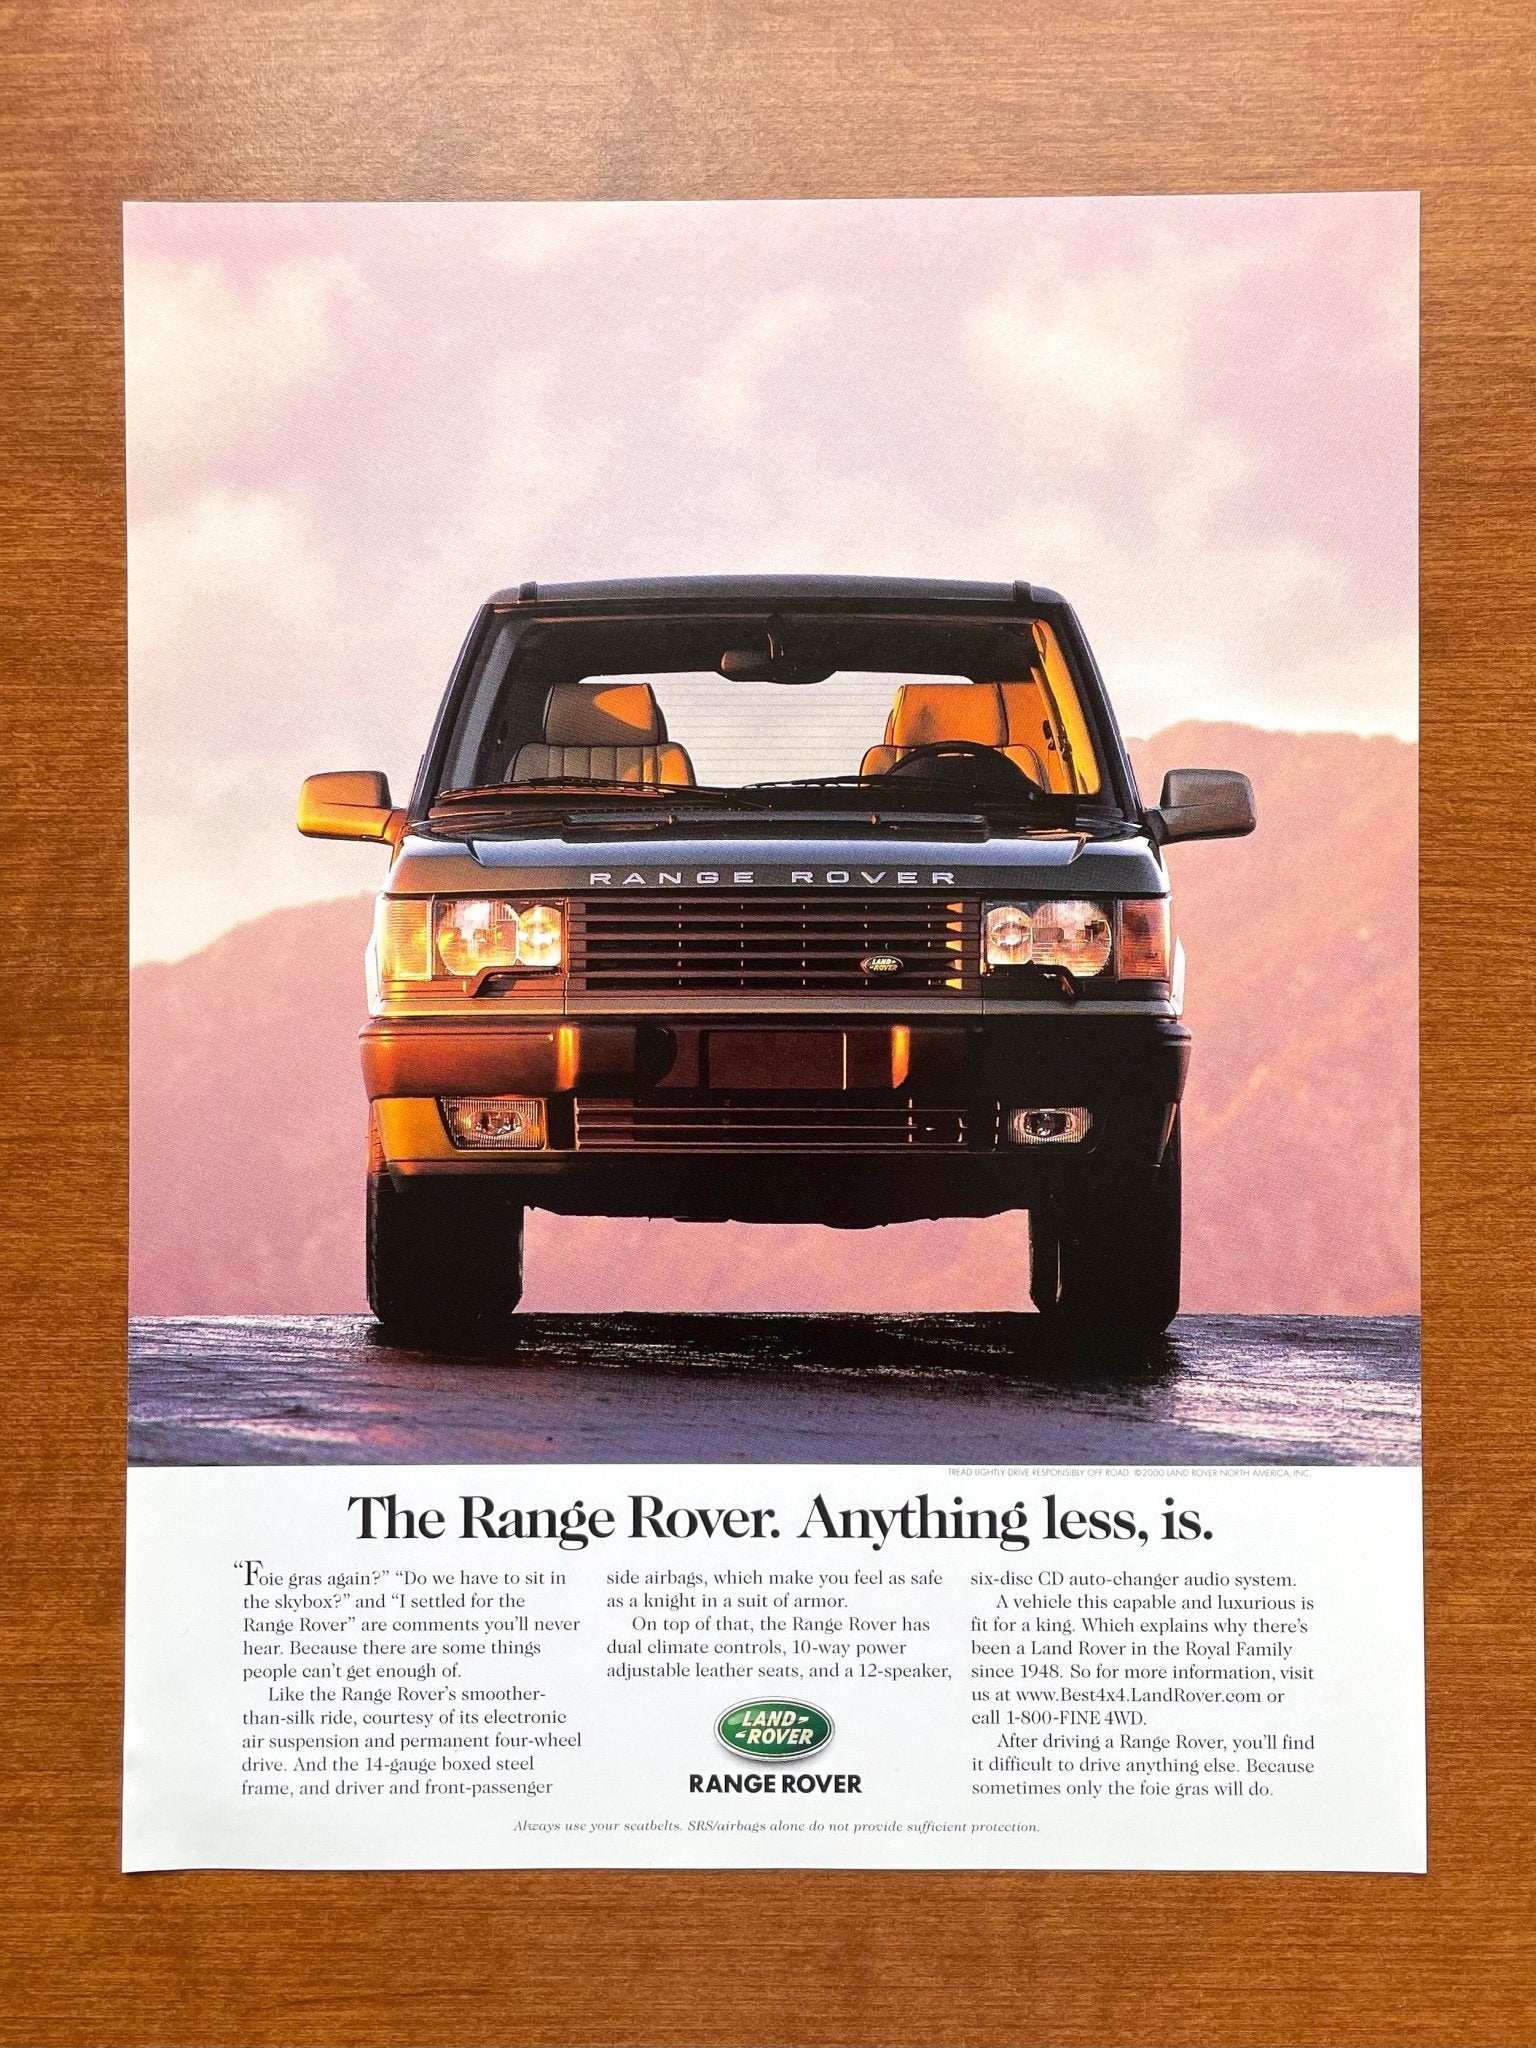 Range Rover "Anything less, is." Ad Proof